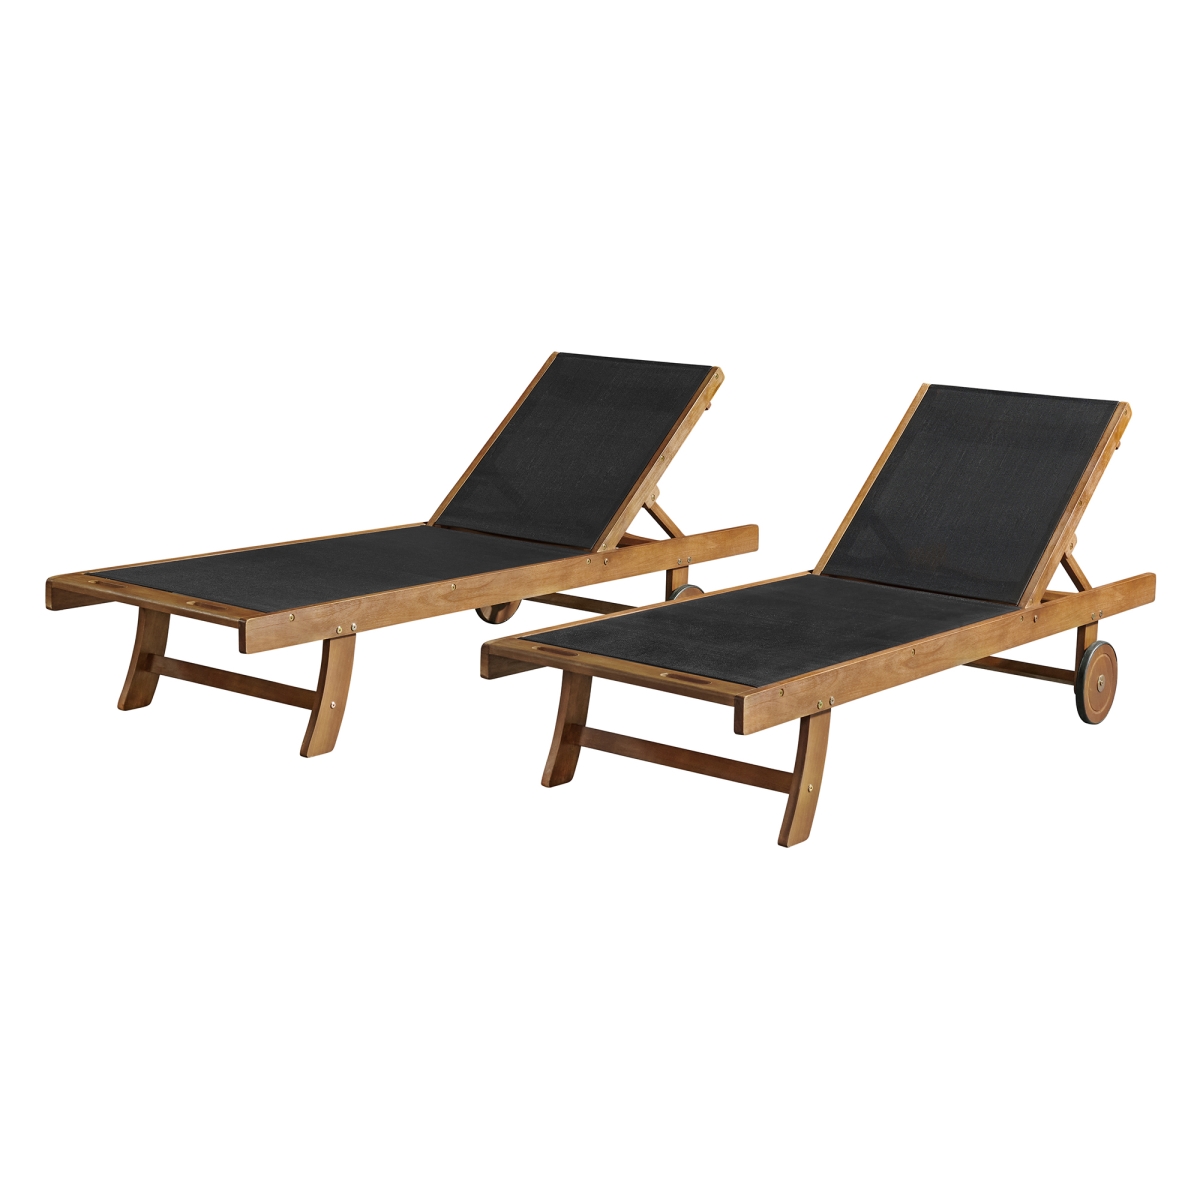 Picture of Alaterre ANCP011EBO Caspian Eucalyptus Wood Outdoor Lounge Chair with Mesh Seating - Set of 2